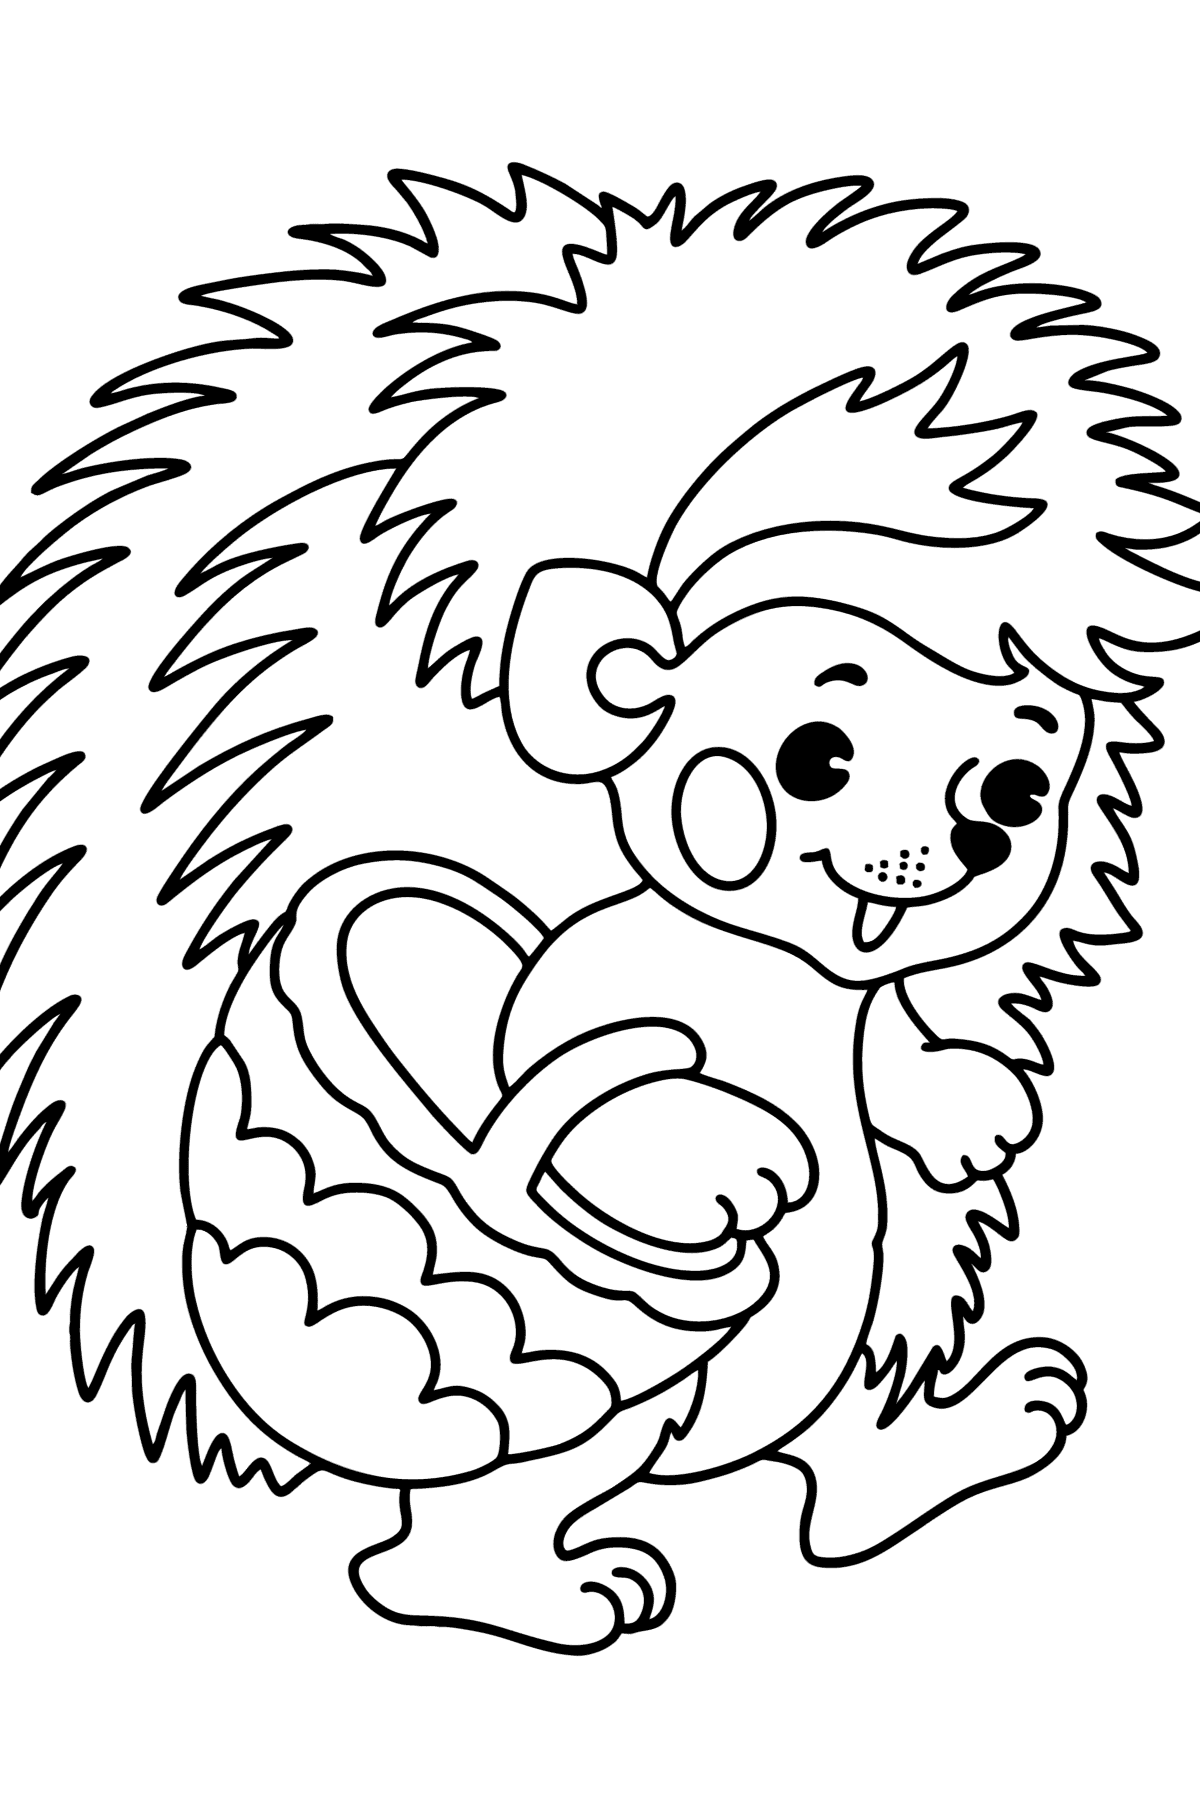 Little hedgehog сoloring page - Coloring Pages for Kids